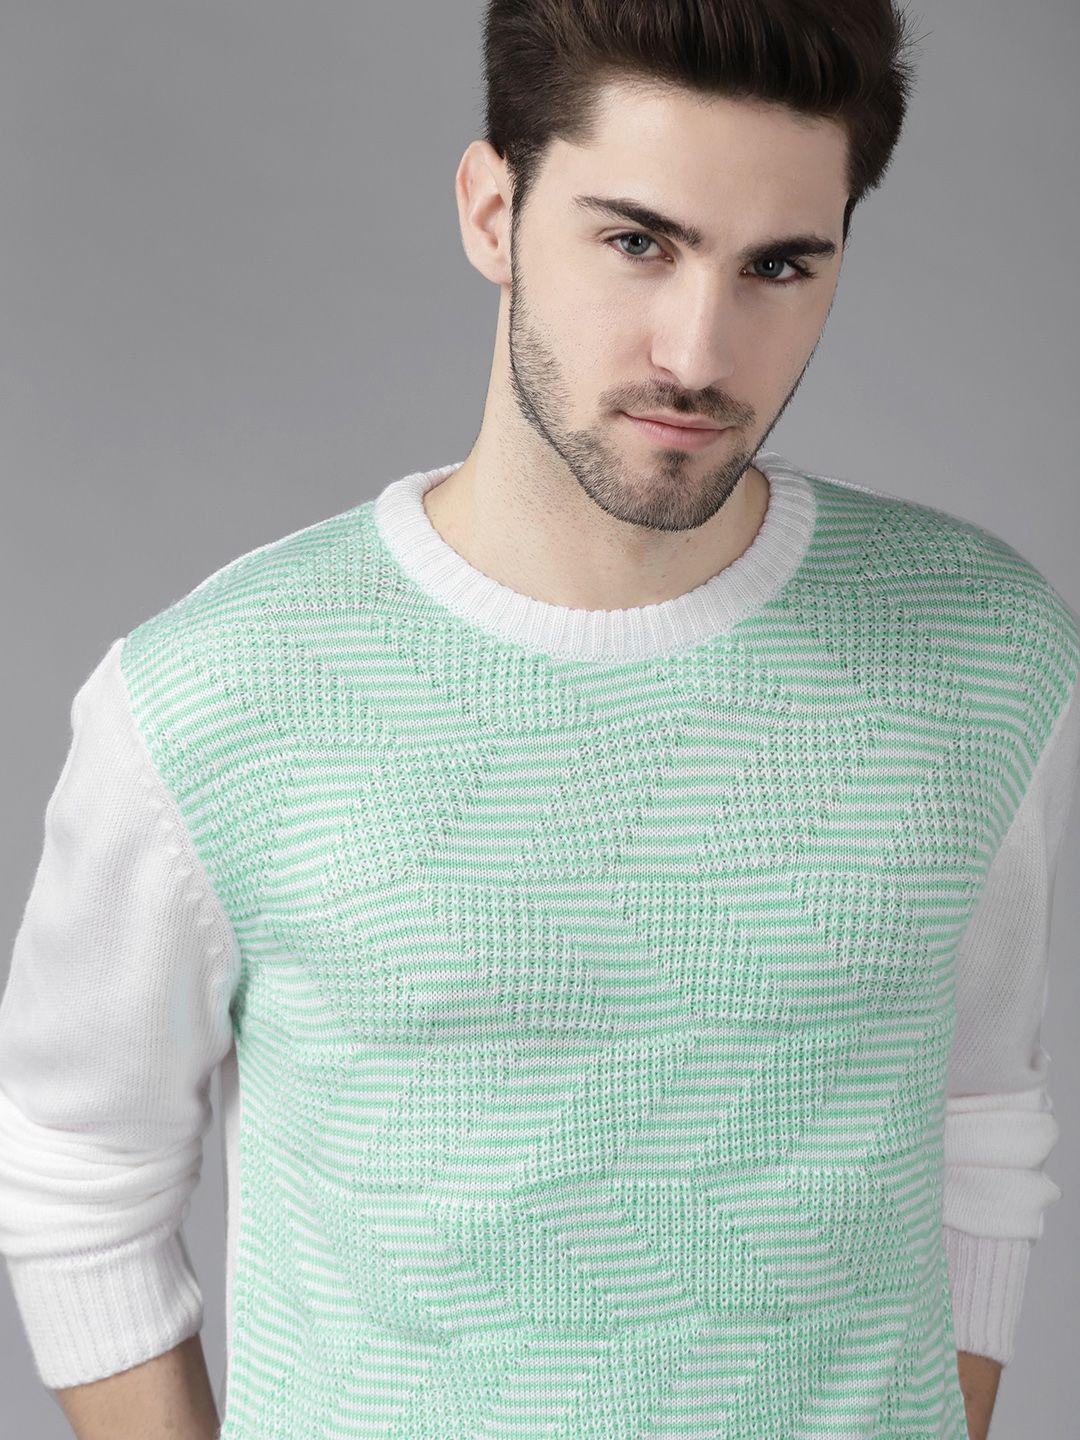 the roadster lifestyle co men green & white acrylic cardigan